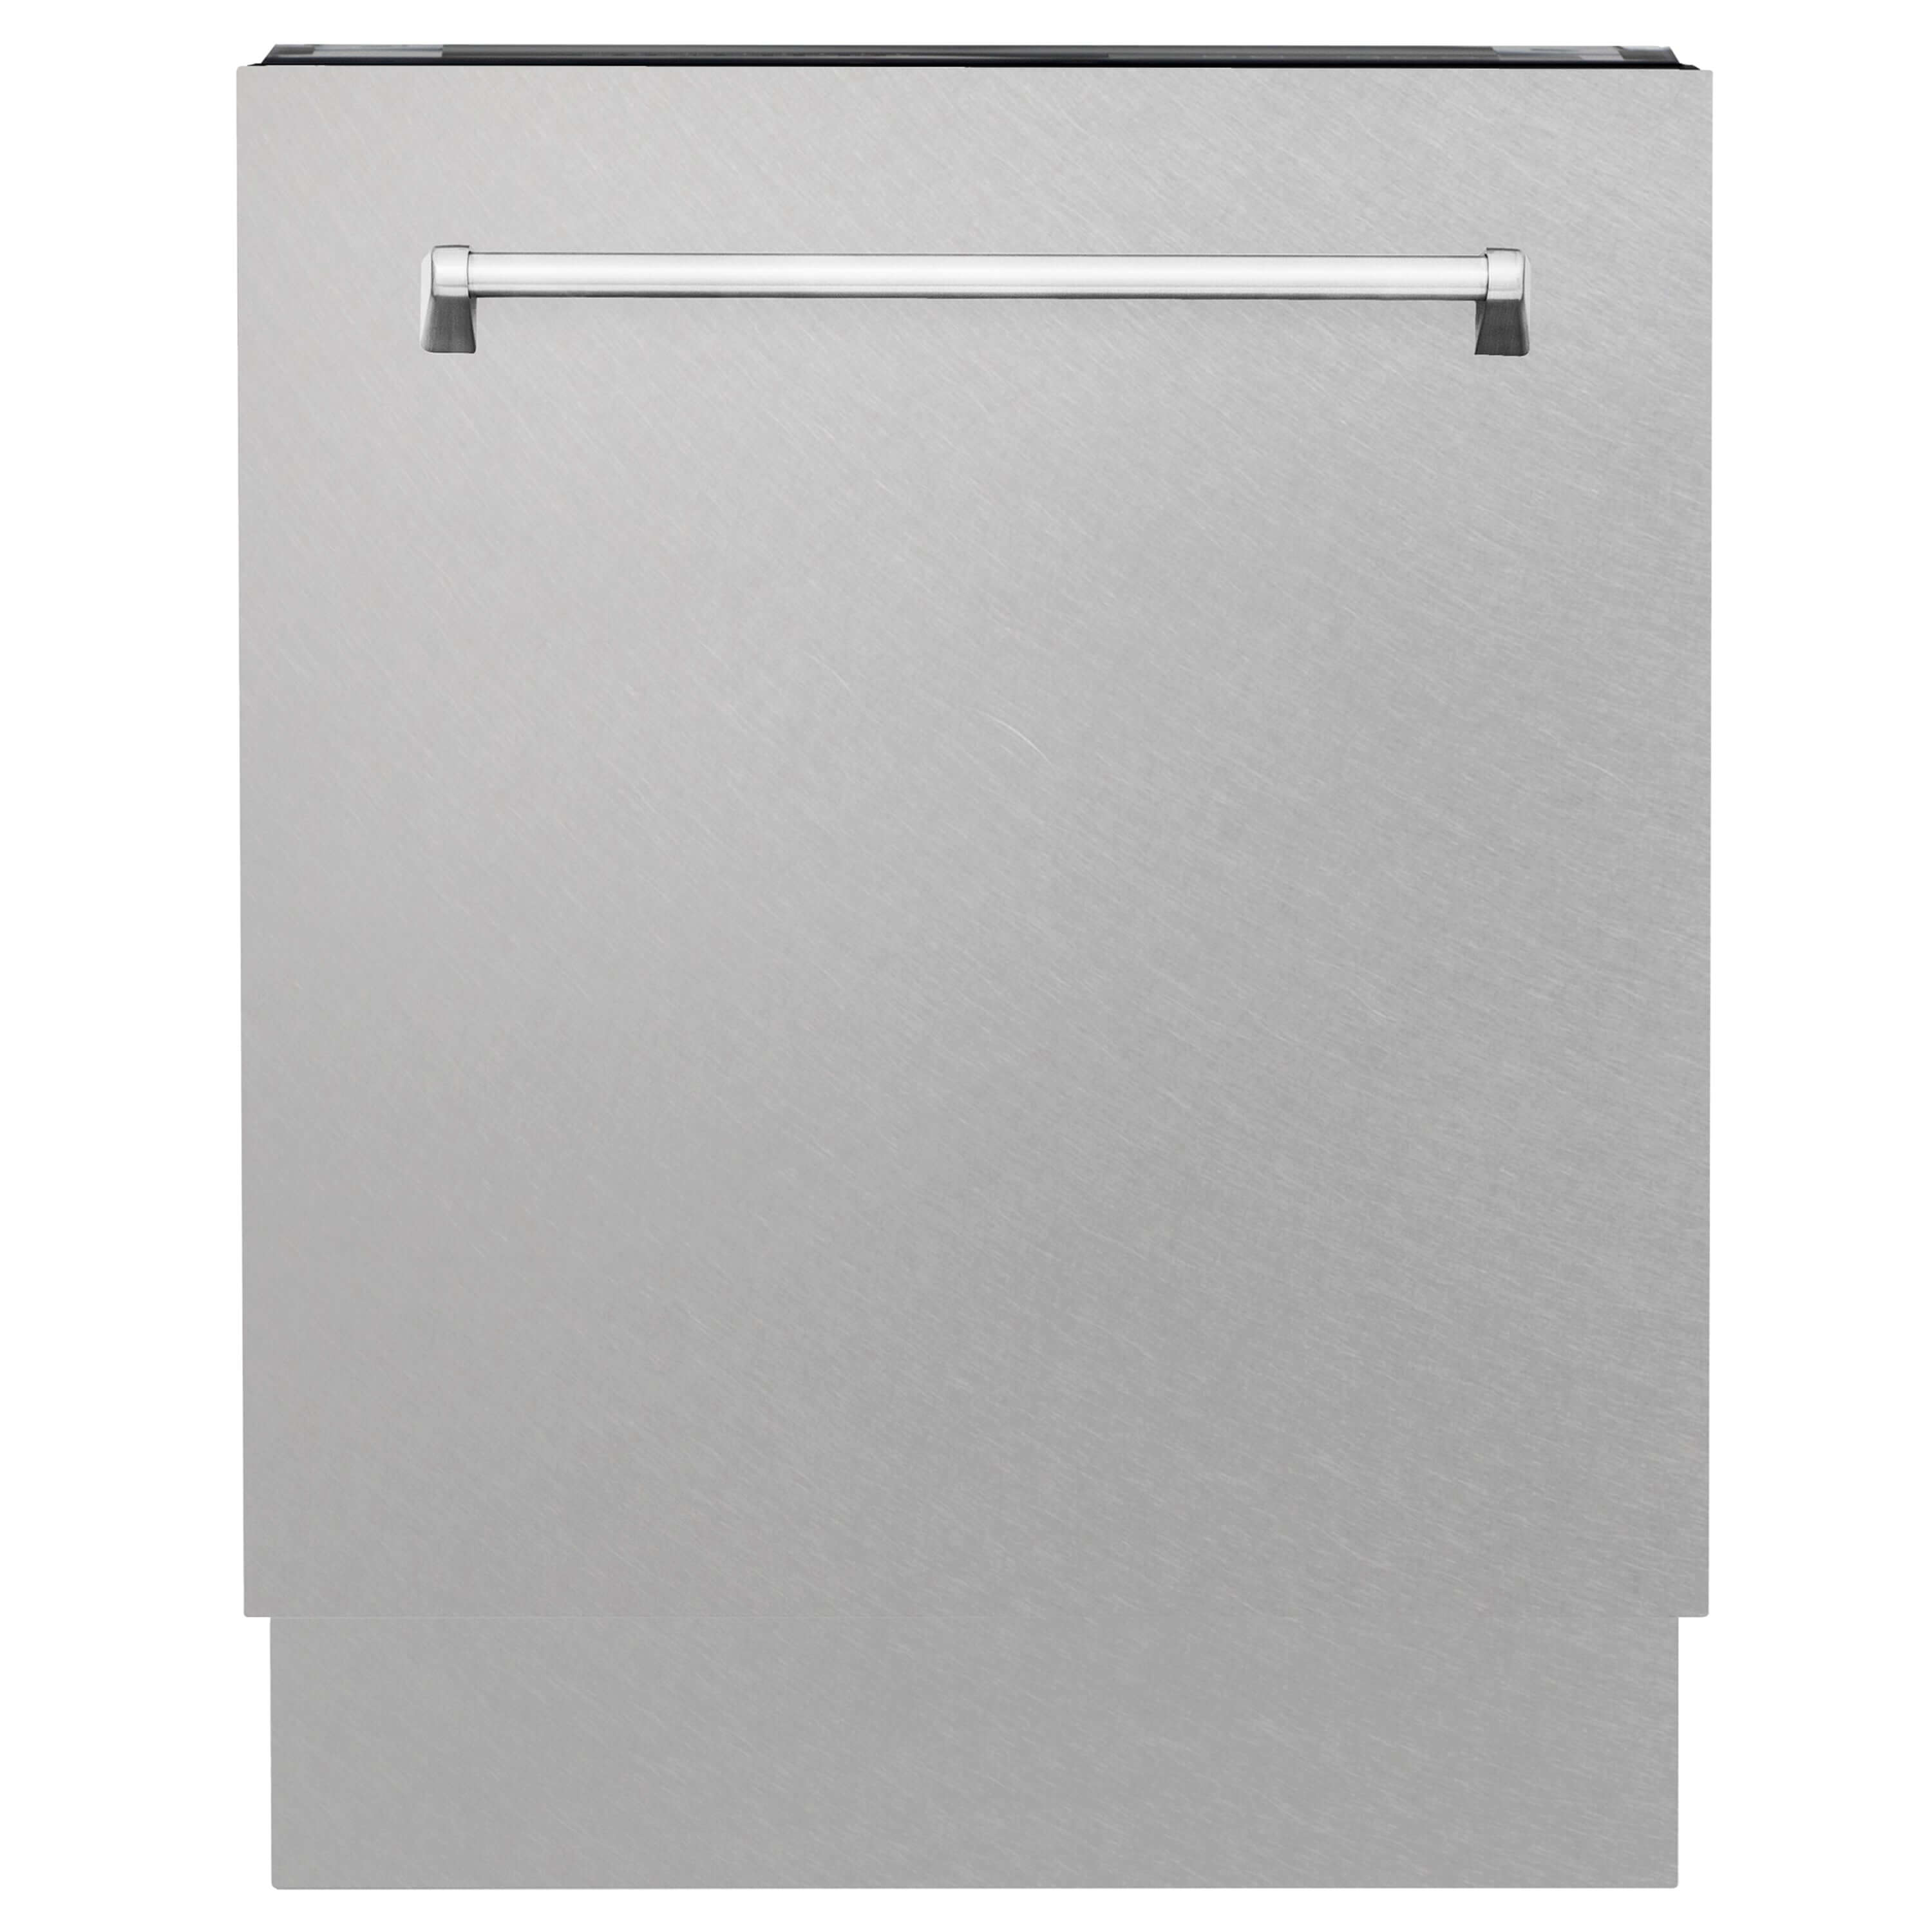 ZLINE 24" Tallac Dishwasher with DuraSnow Stainless Steel Panel and Traditional Handle front.